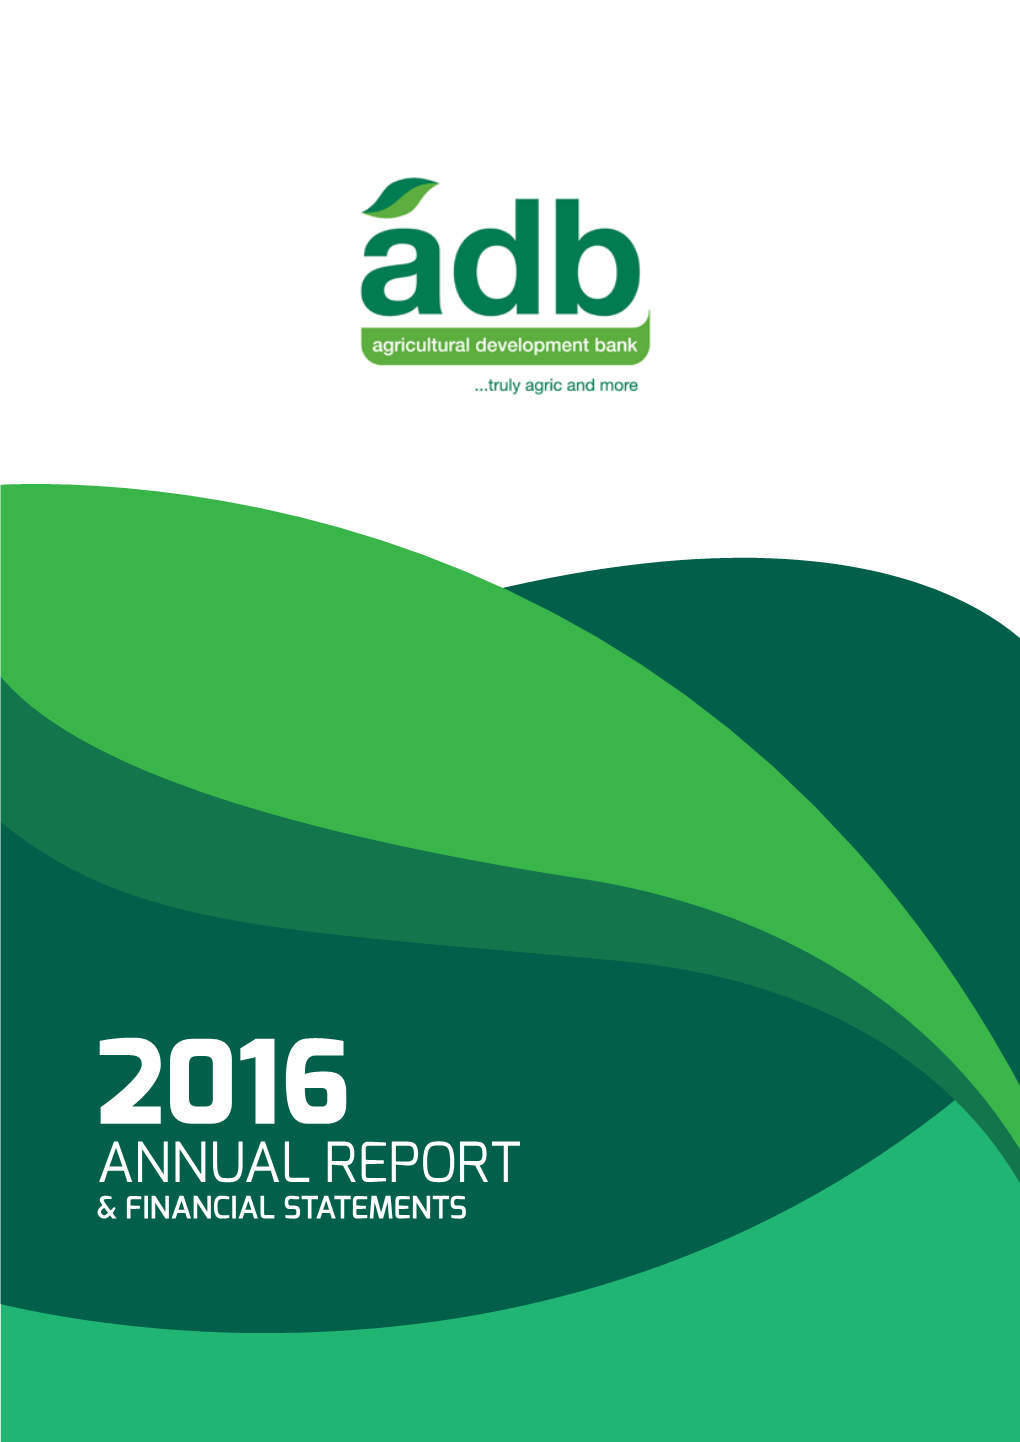 Annual Report & Financial Statements